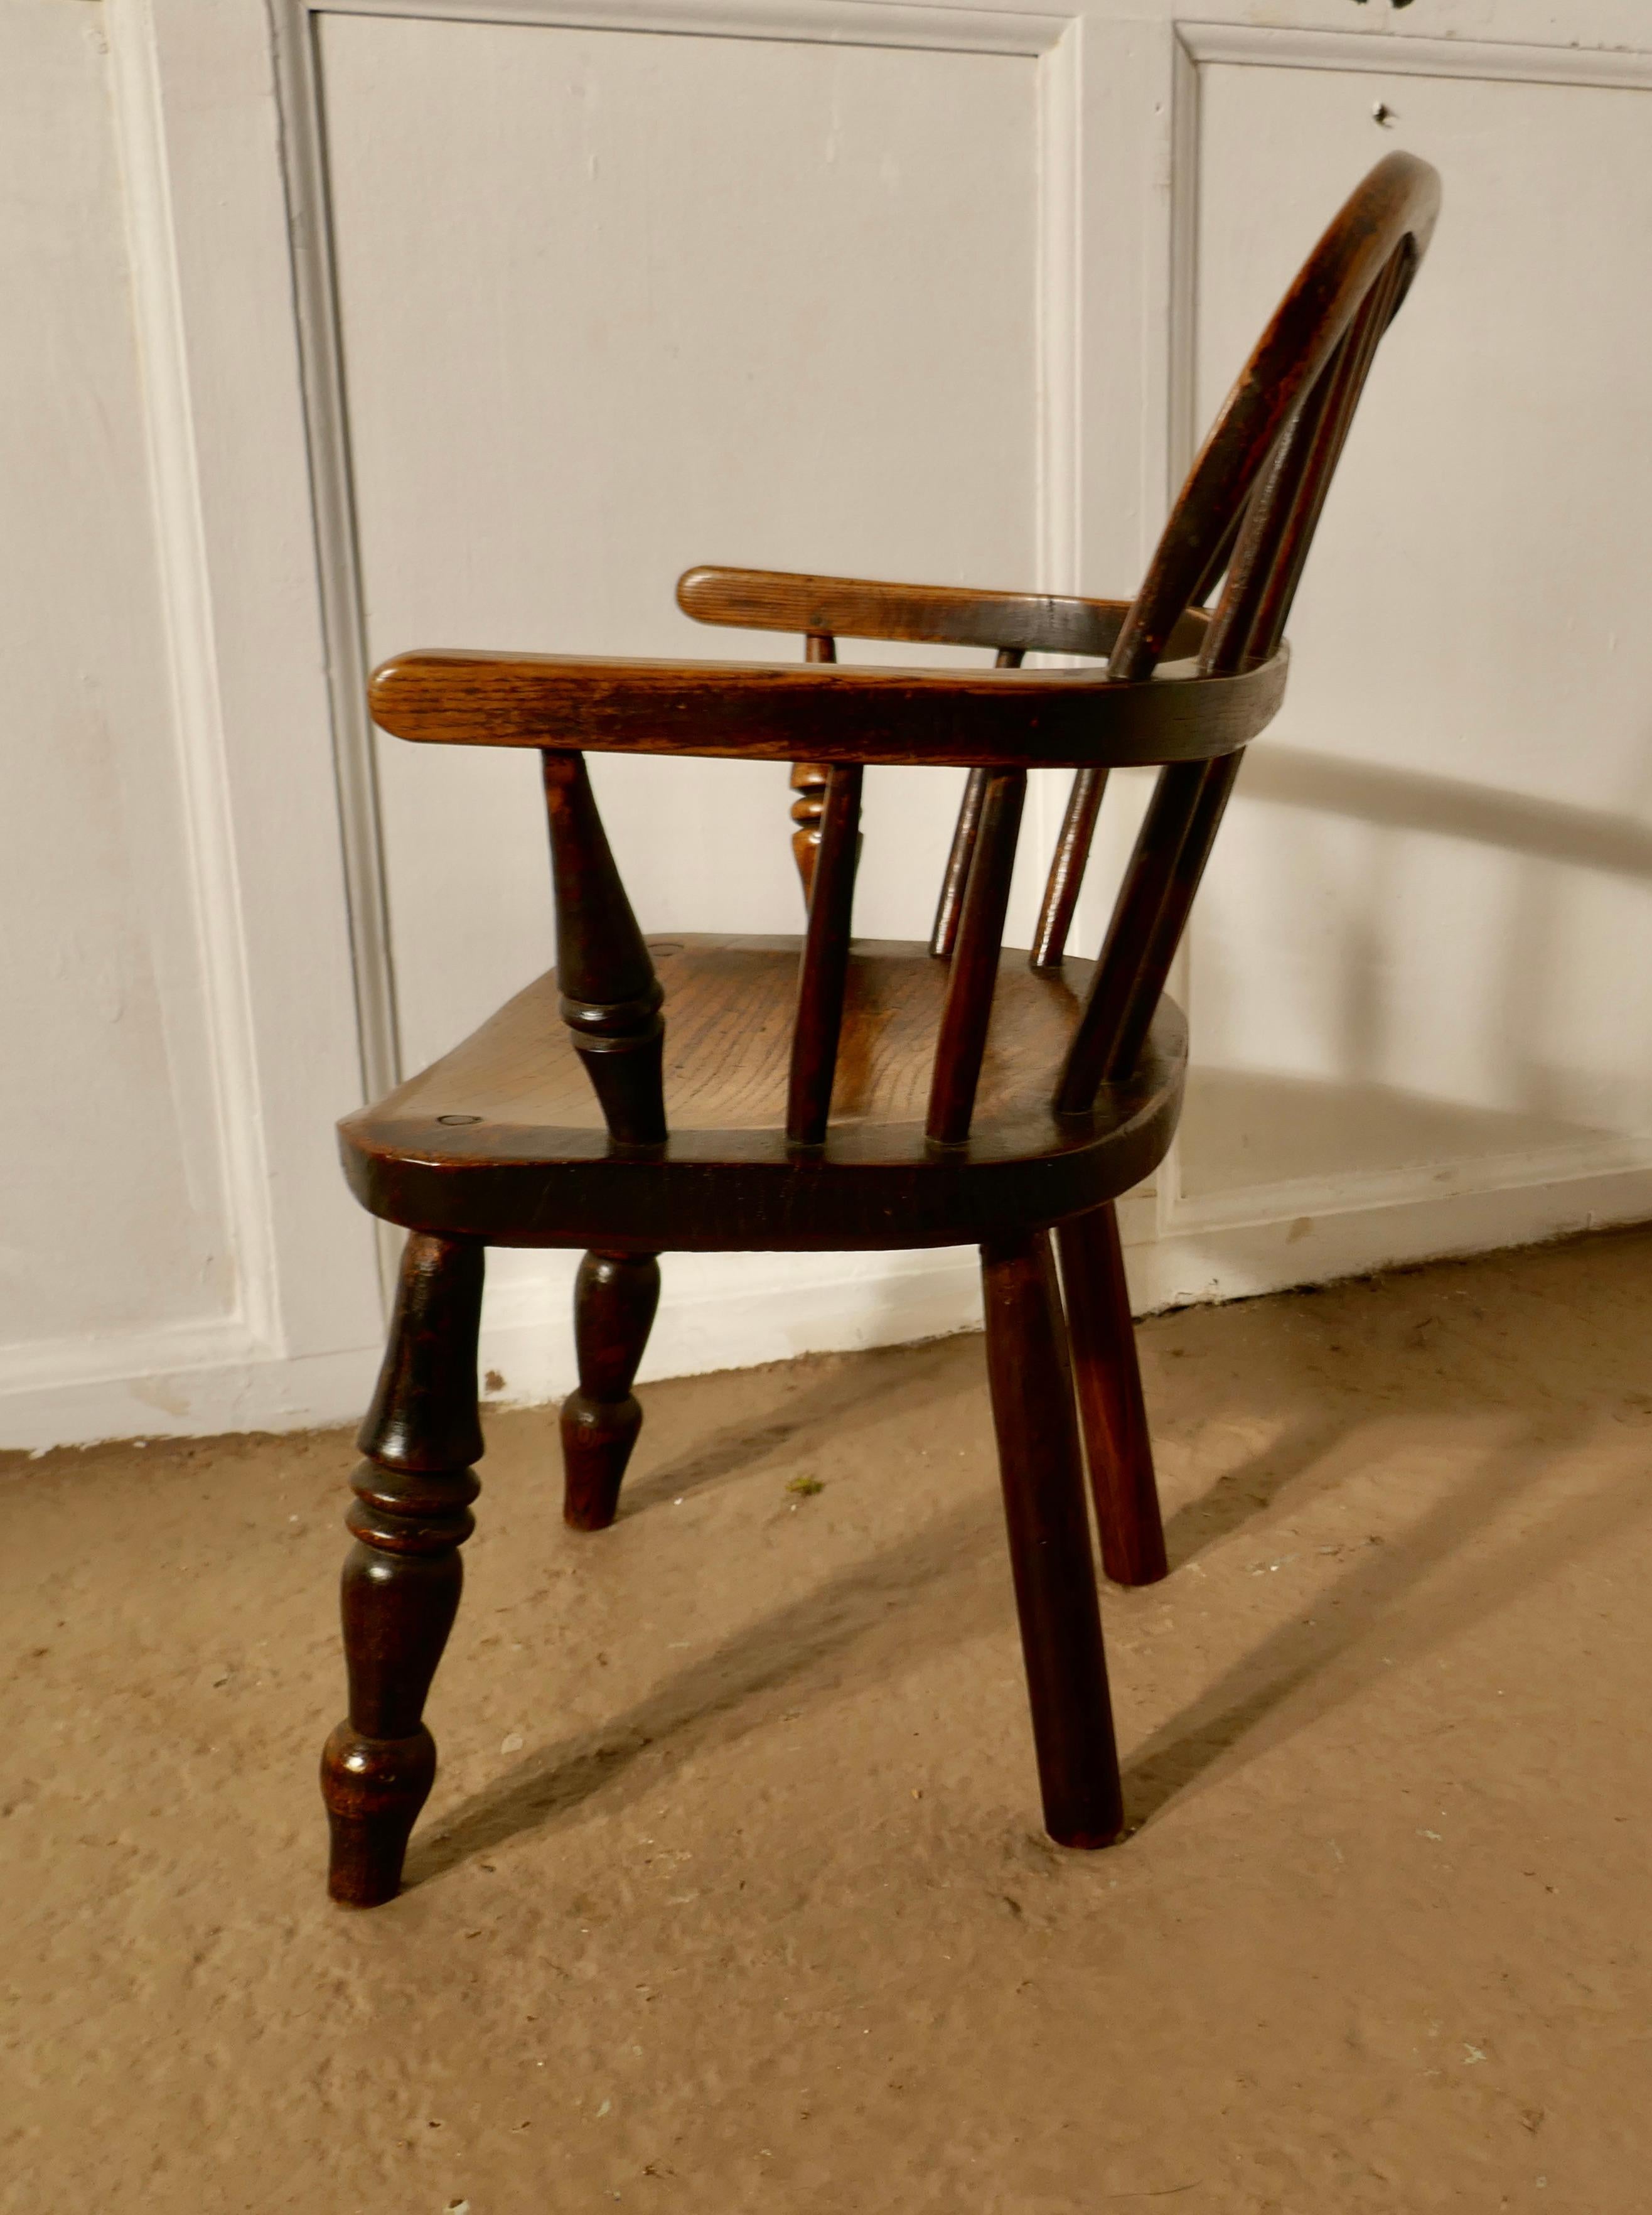 Early 19th century beech and elm childs country carver chair


This is an early 19th century chair with an elm seat, it has a hooped back in the traditional Windsor style with a saddle seat and turned front legs
Unusually the back legs are